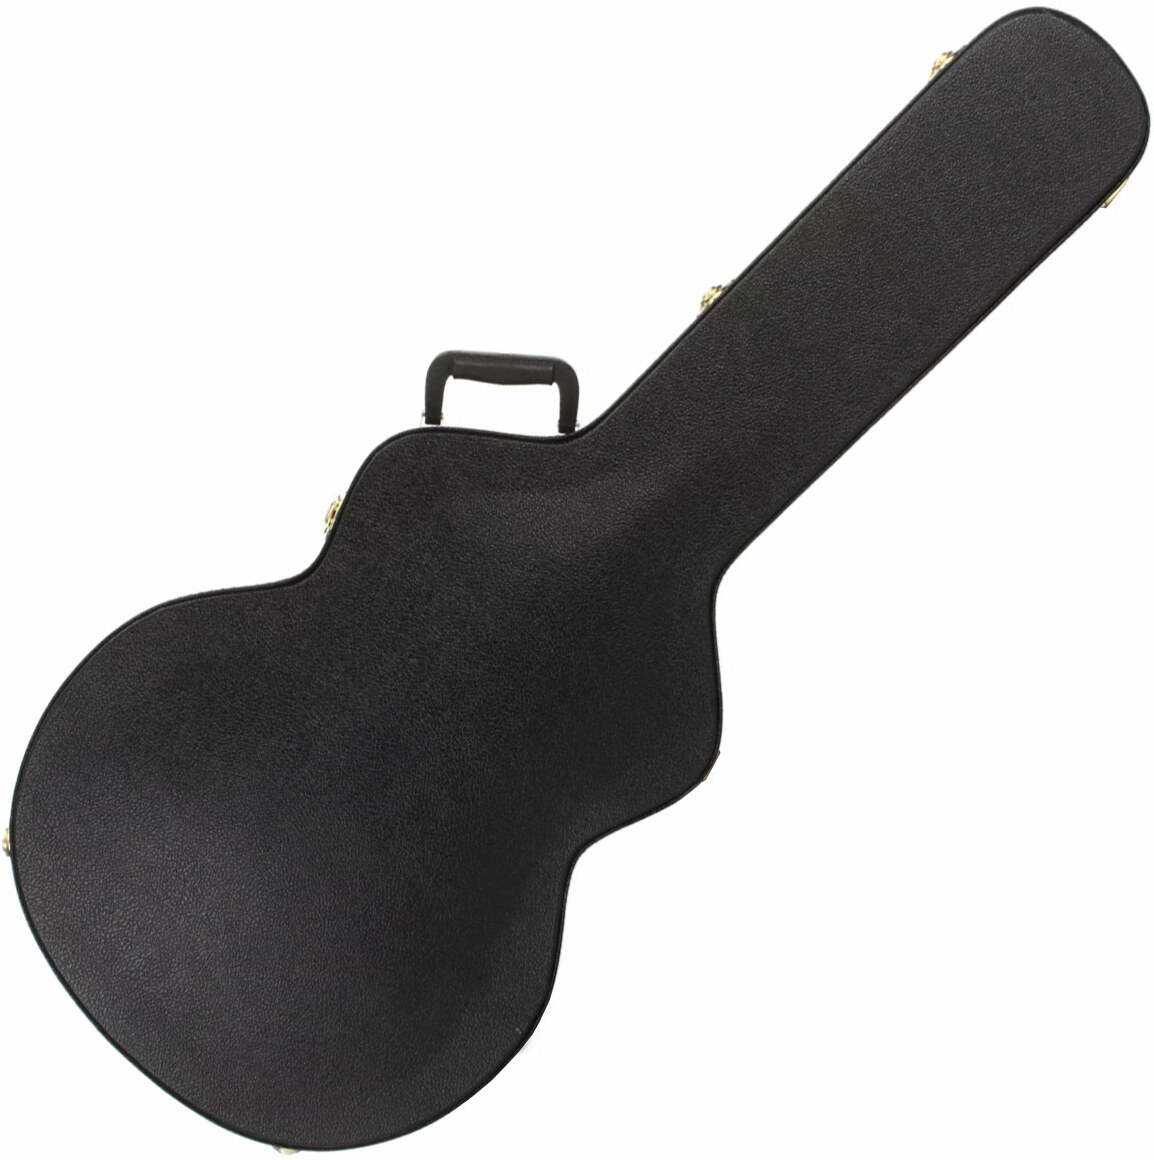 Gretsch G6267 16inch Thin Hollow Body Guitar Case - Electric guitar case - Main picture